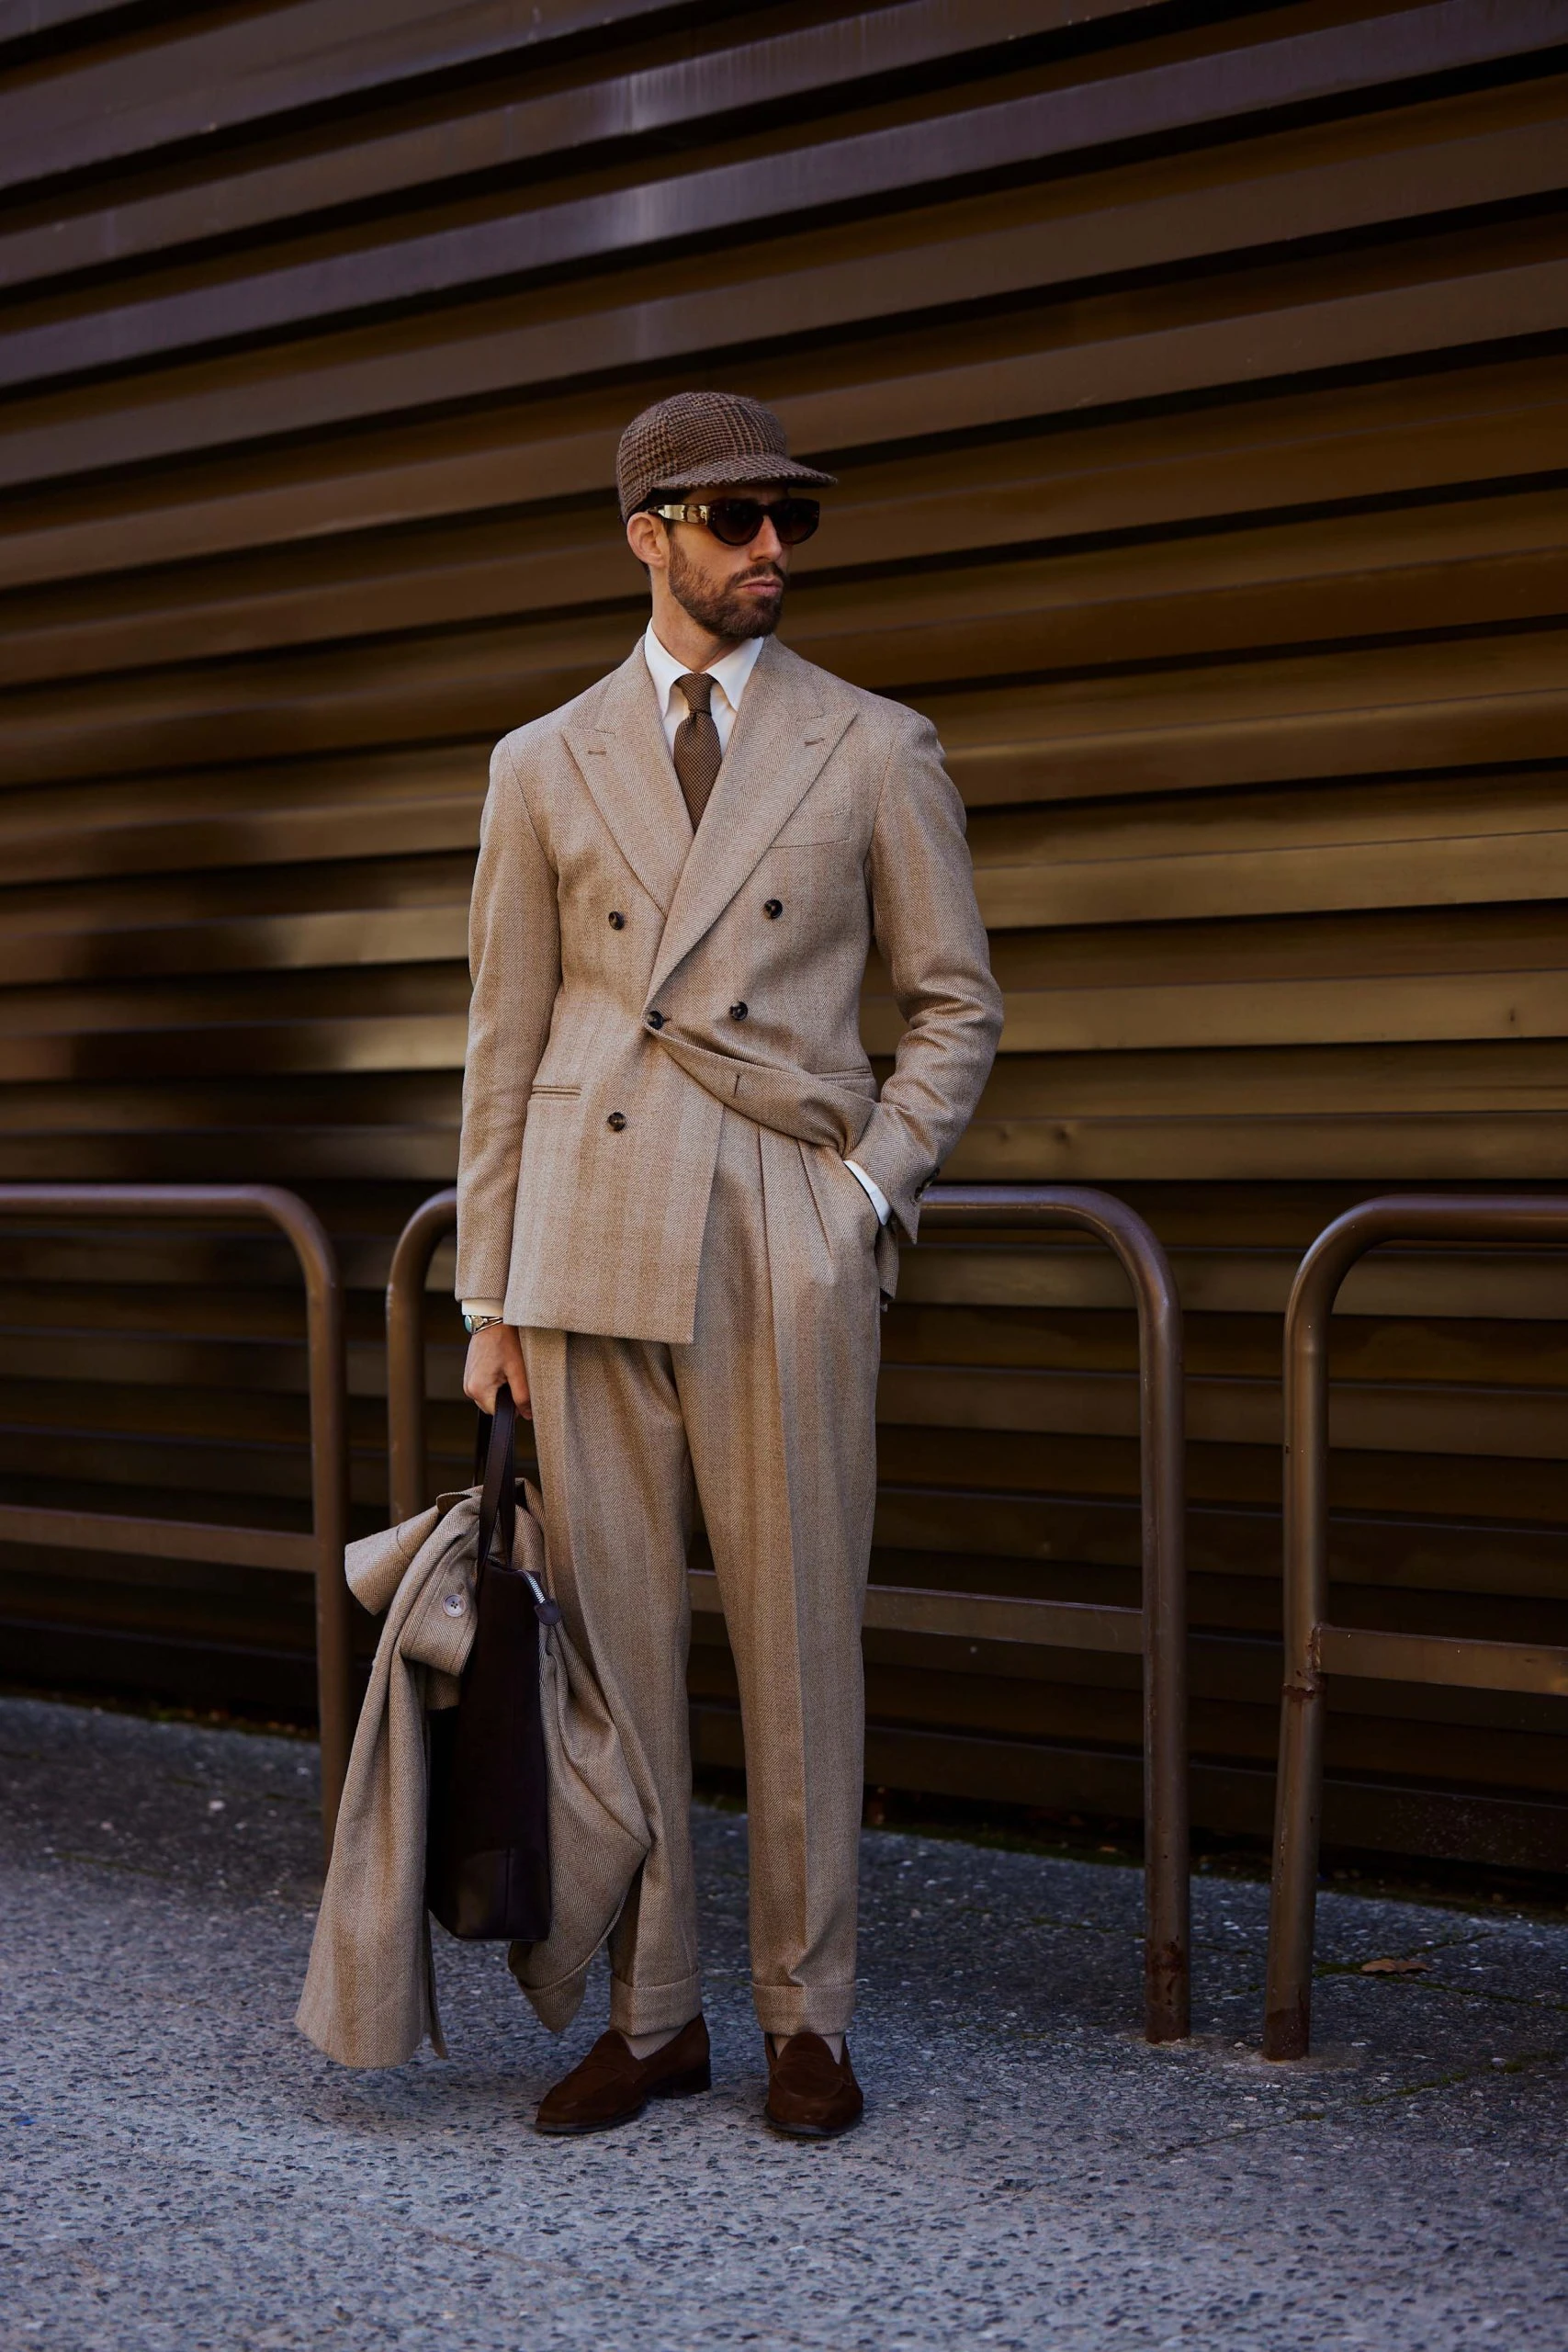 carlos domord at pitti uomo wearing a custom made mond suit